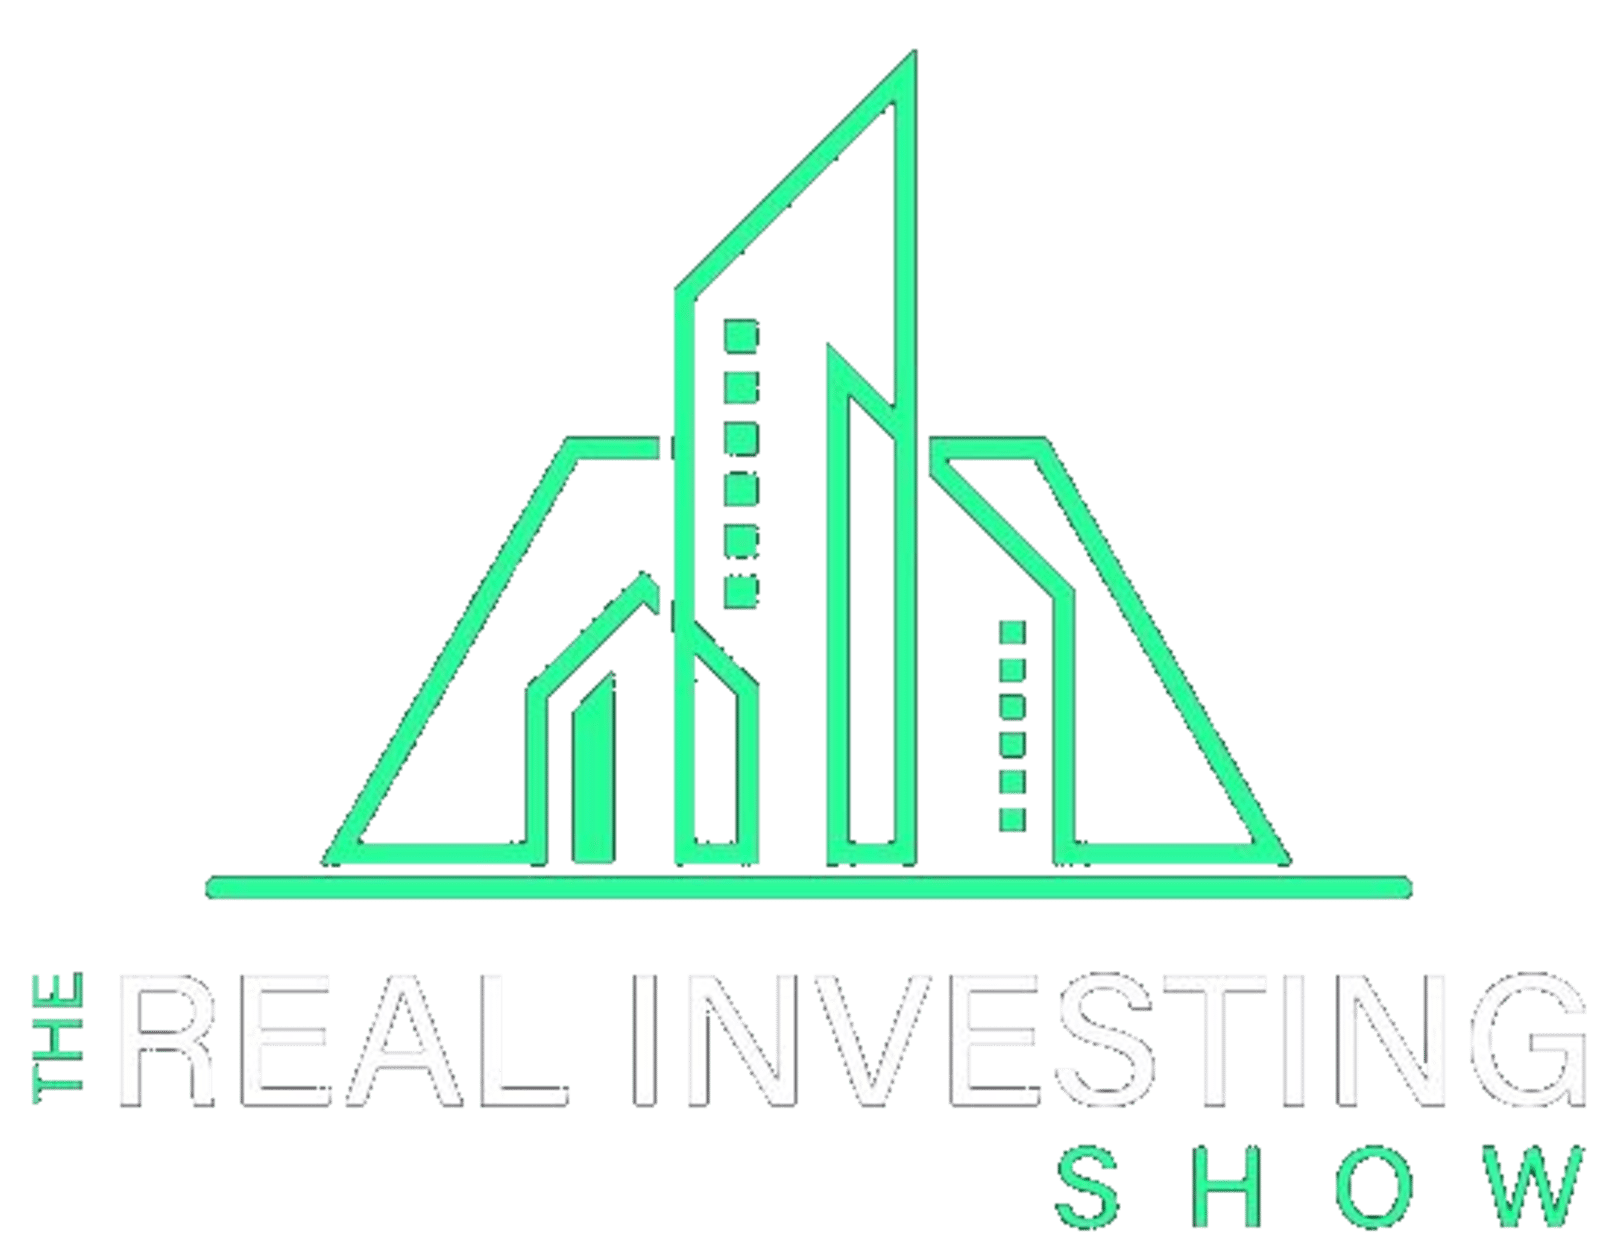 The Real Investing Show